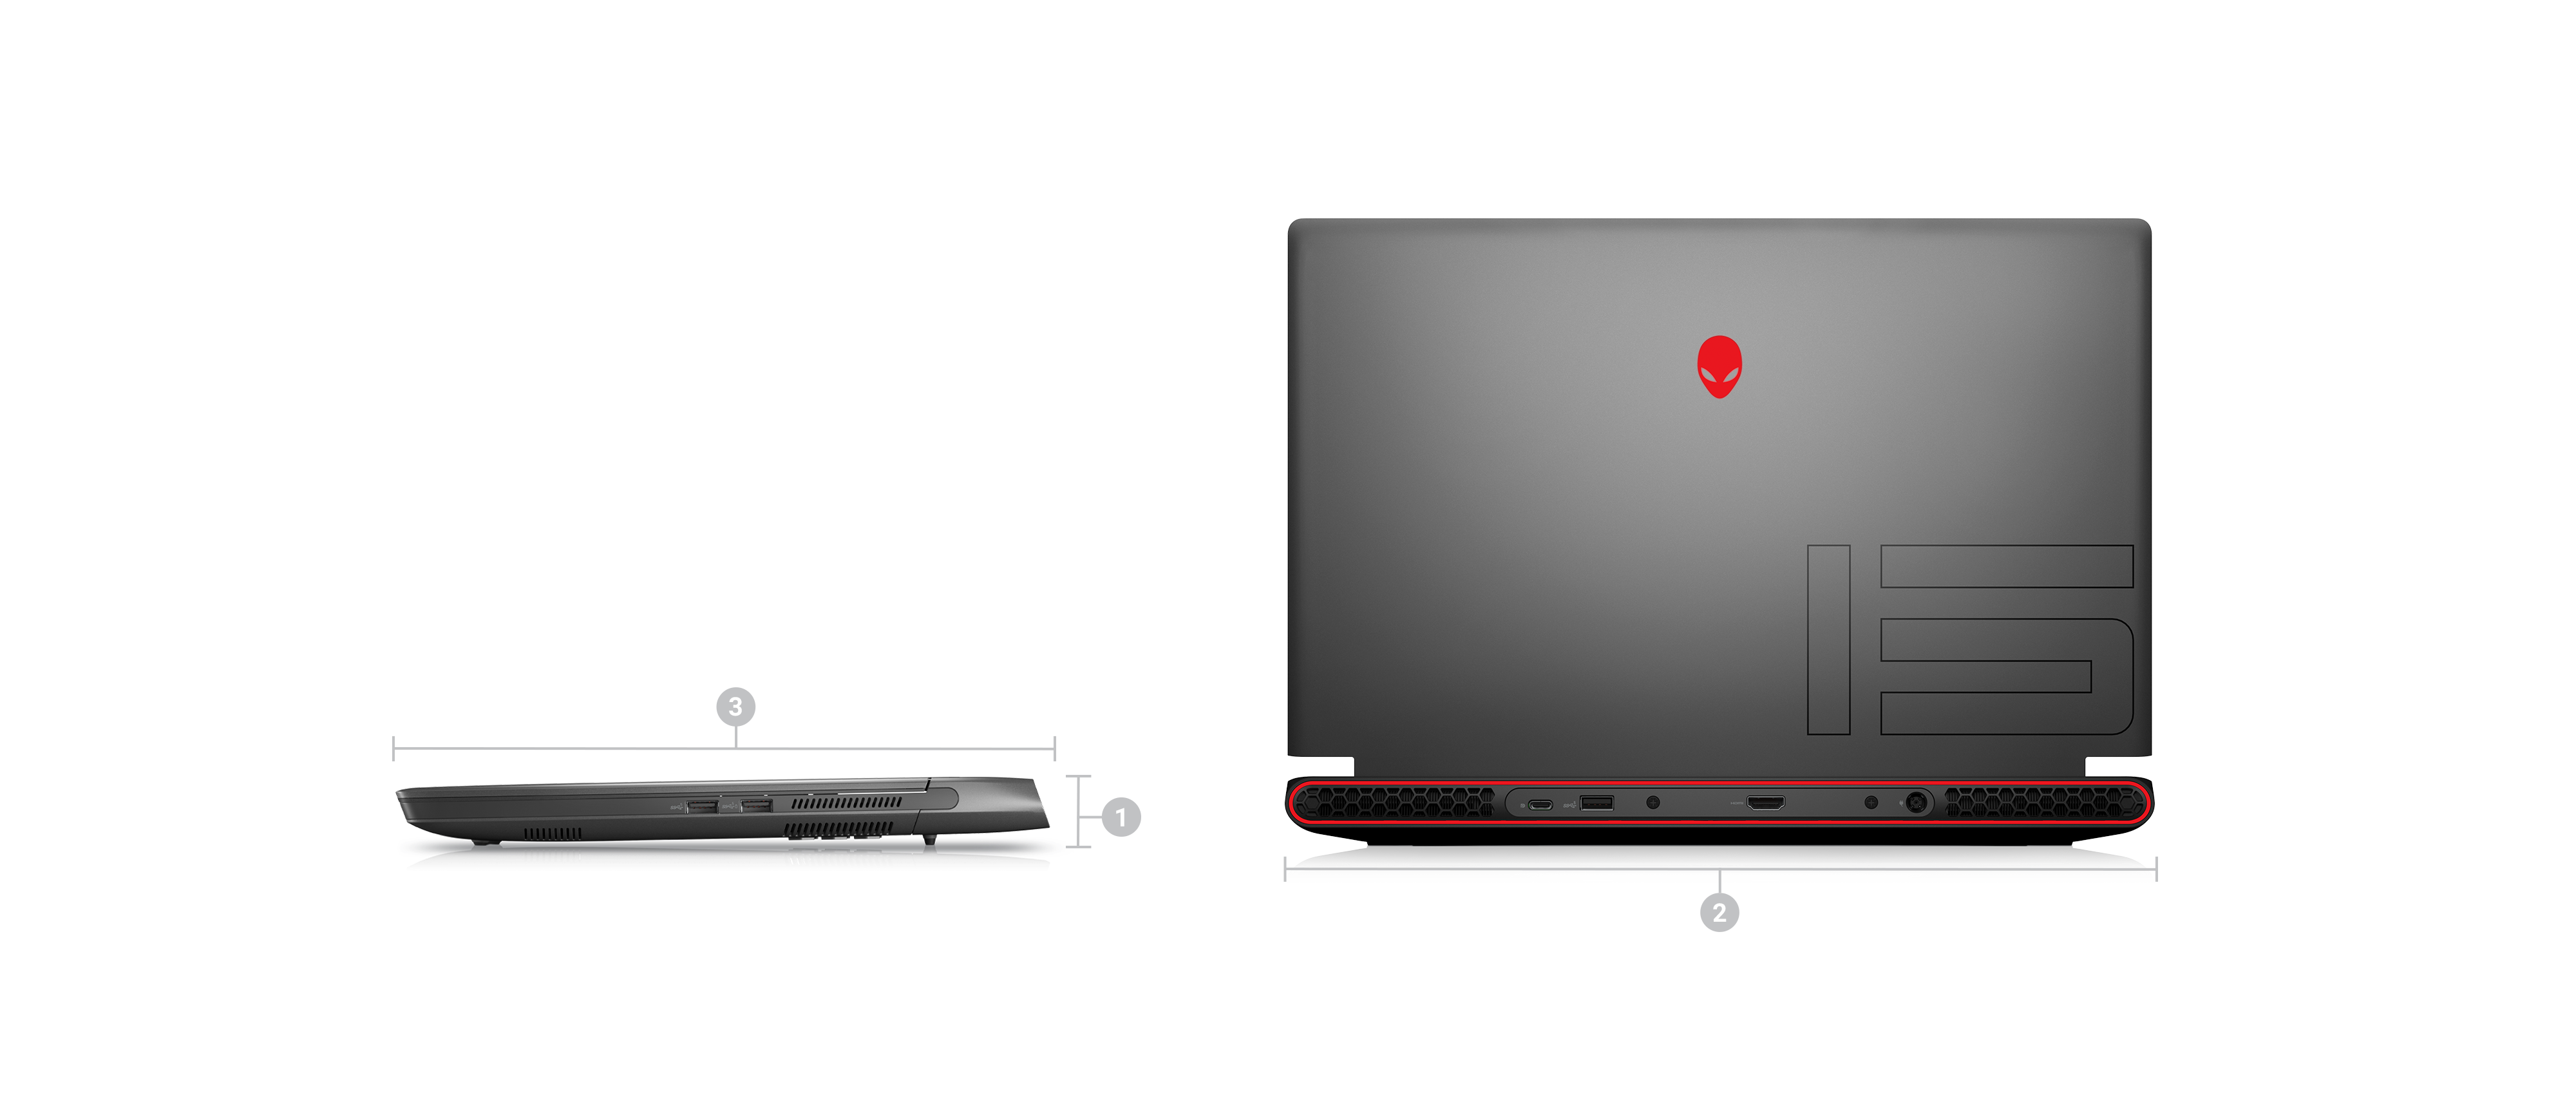 Picture of two Dell Alienware M15 R7 Gaming Laptops with numbers from 1 to 3 signaling product dimensions & weight.